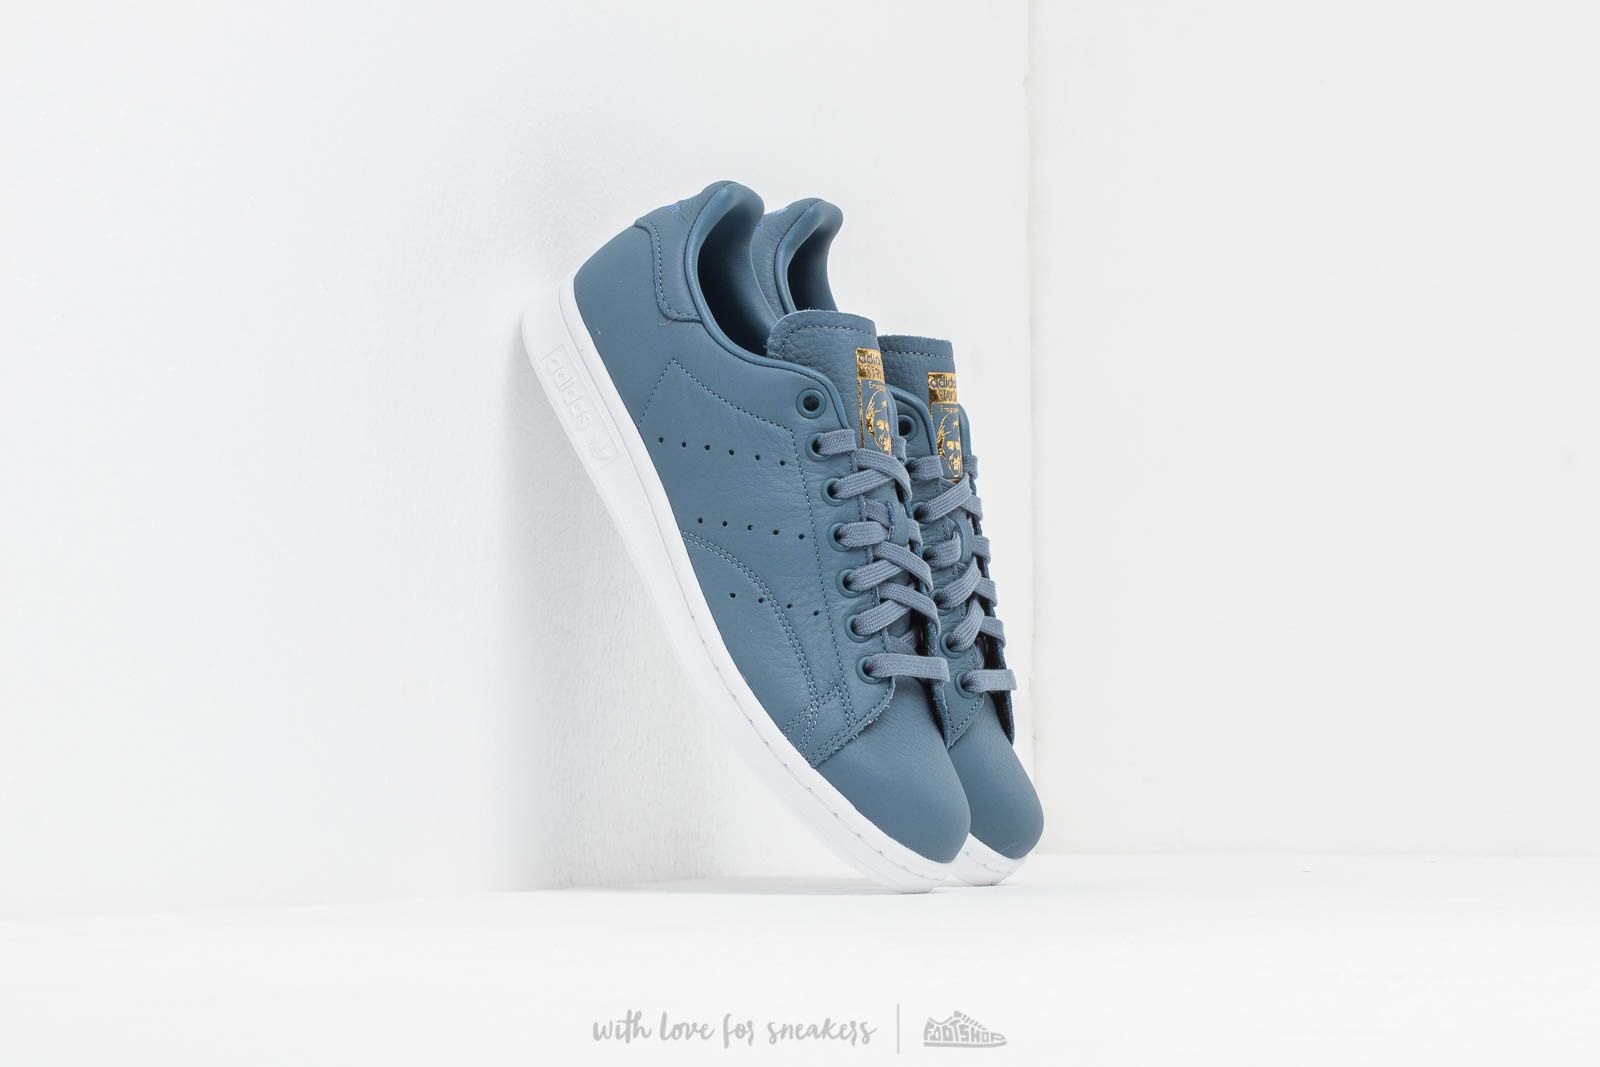 Snickers recommendet stan smith adidas